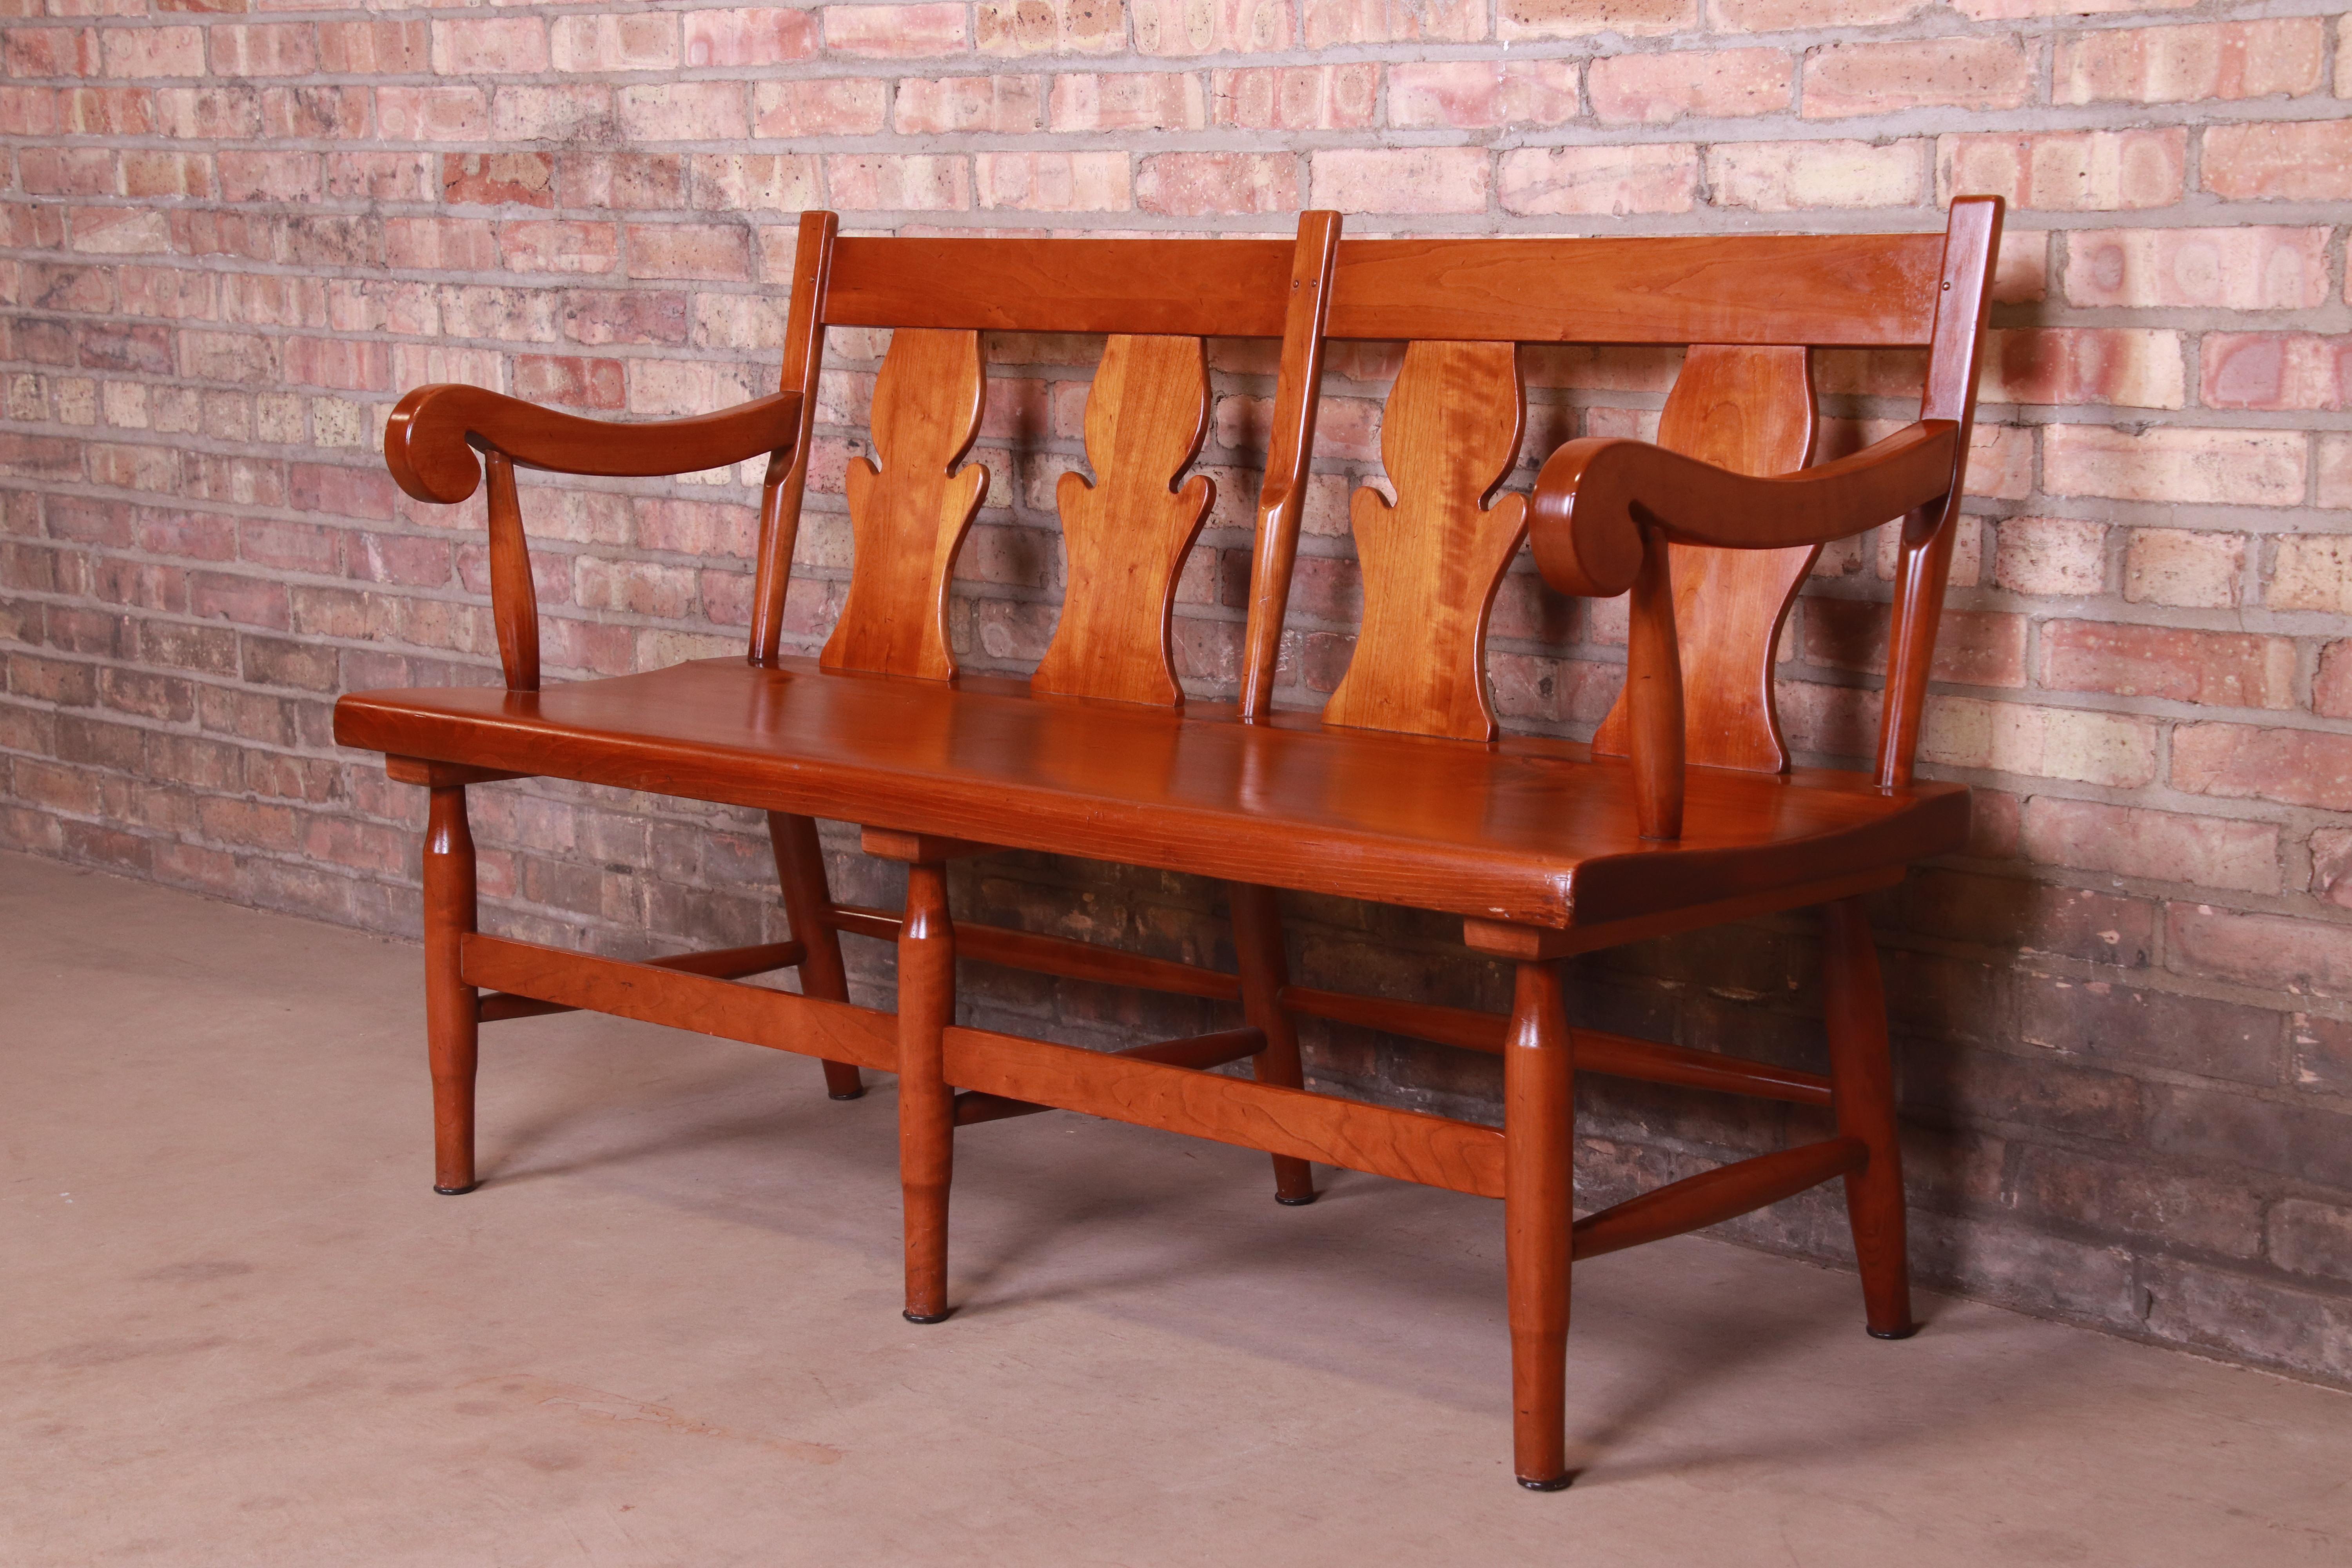 Stickley American Colonial Cherry Wood Fiddle Back Bench or Settee, Circa 1950s 2